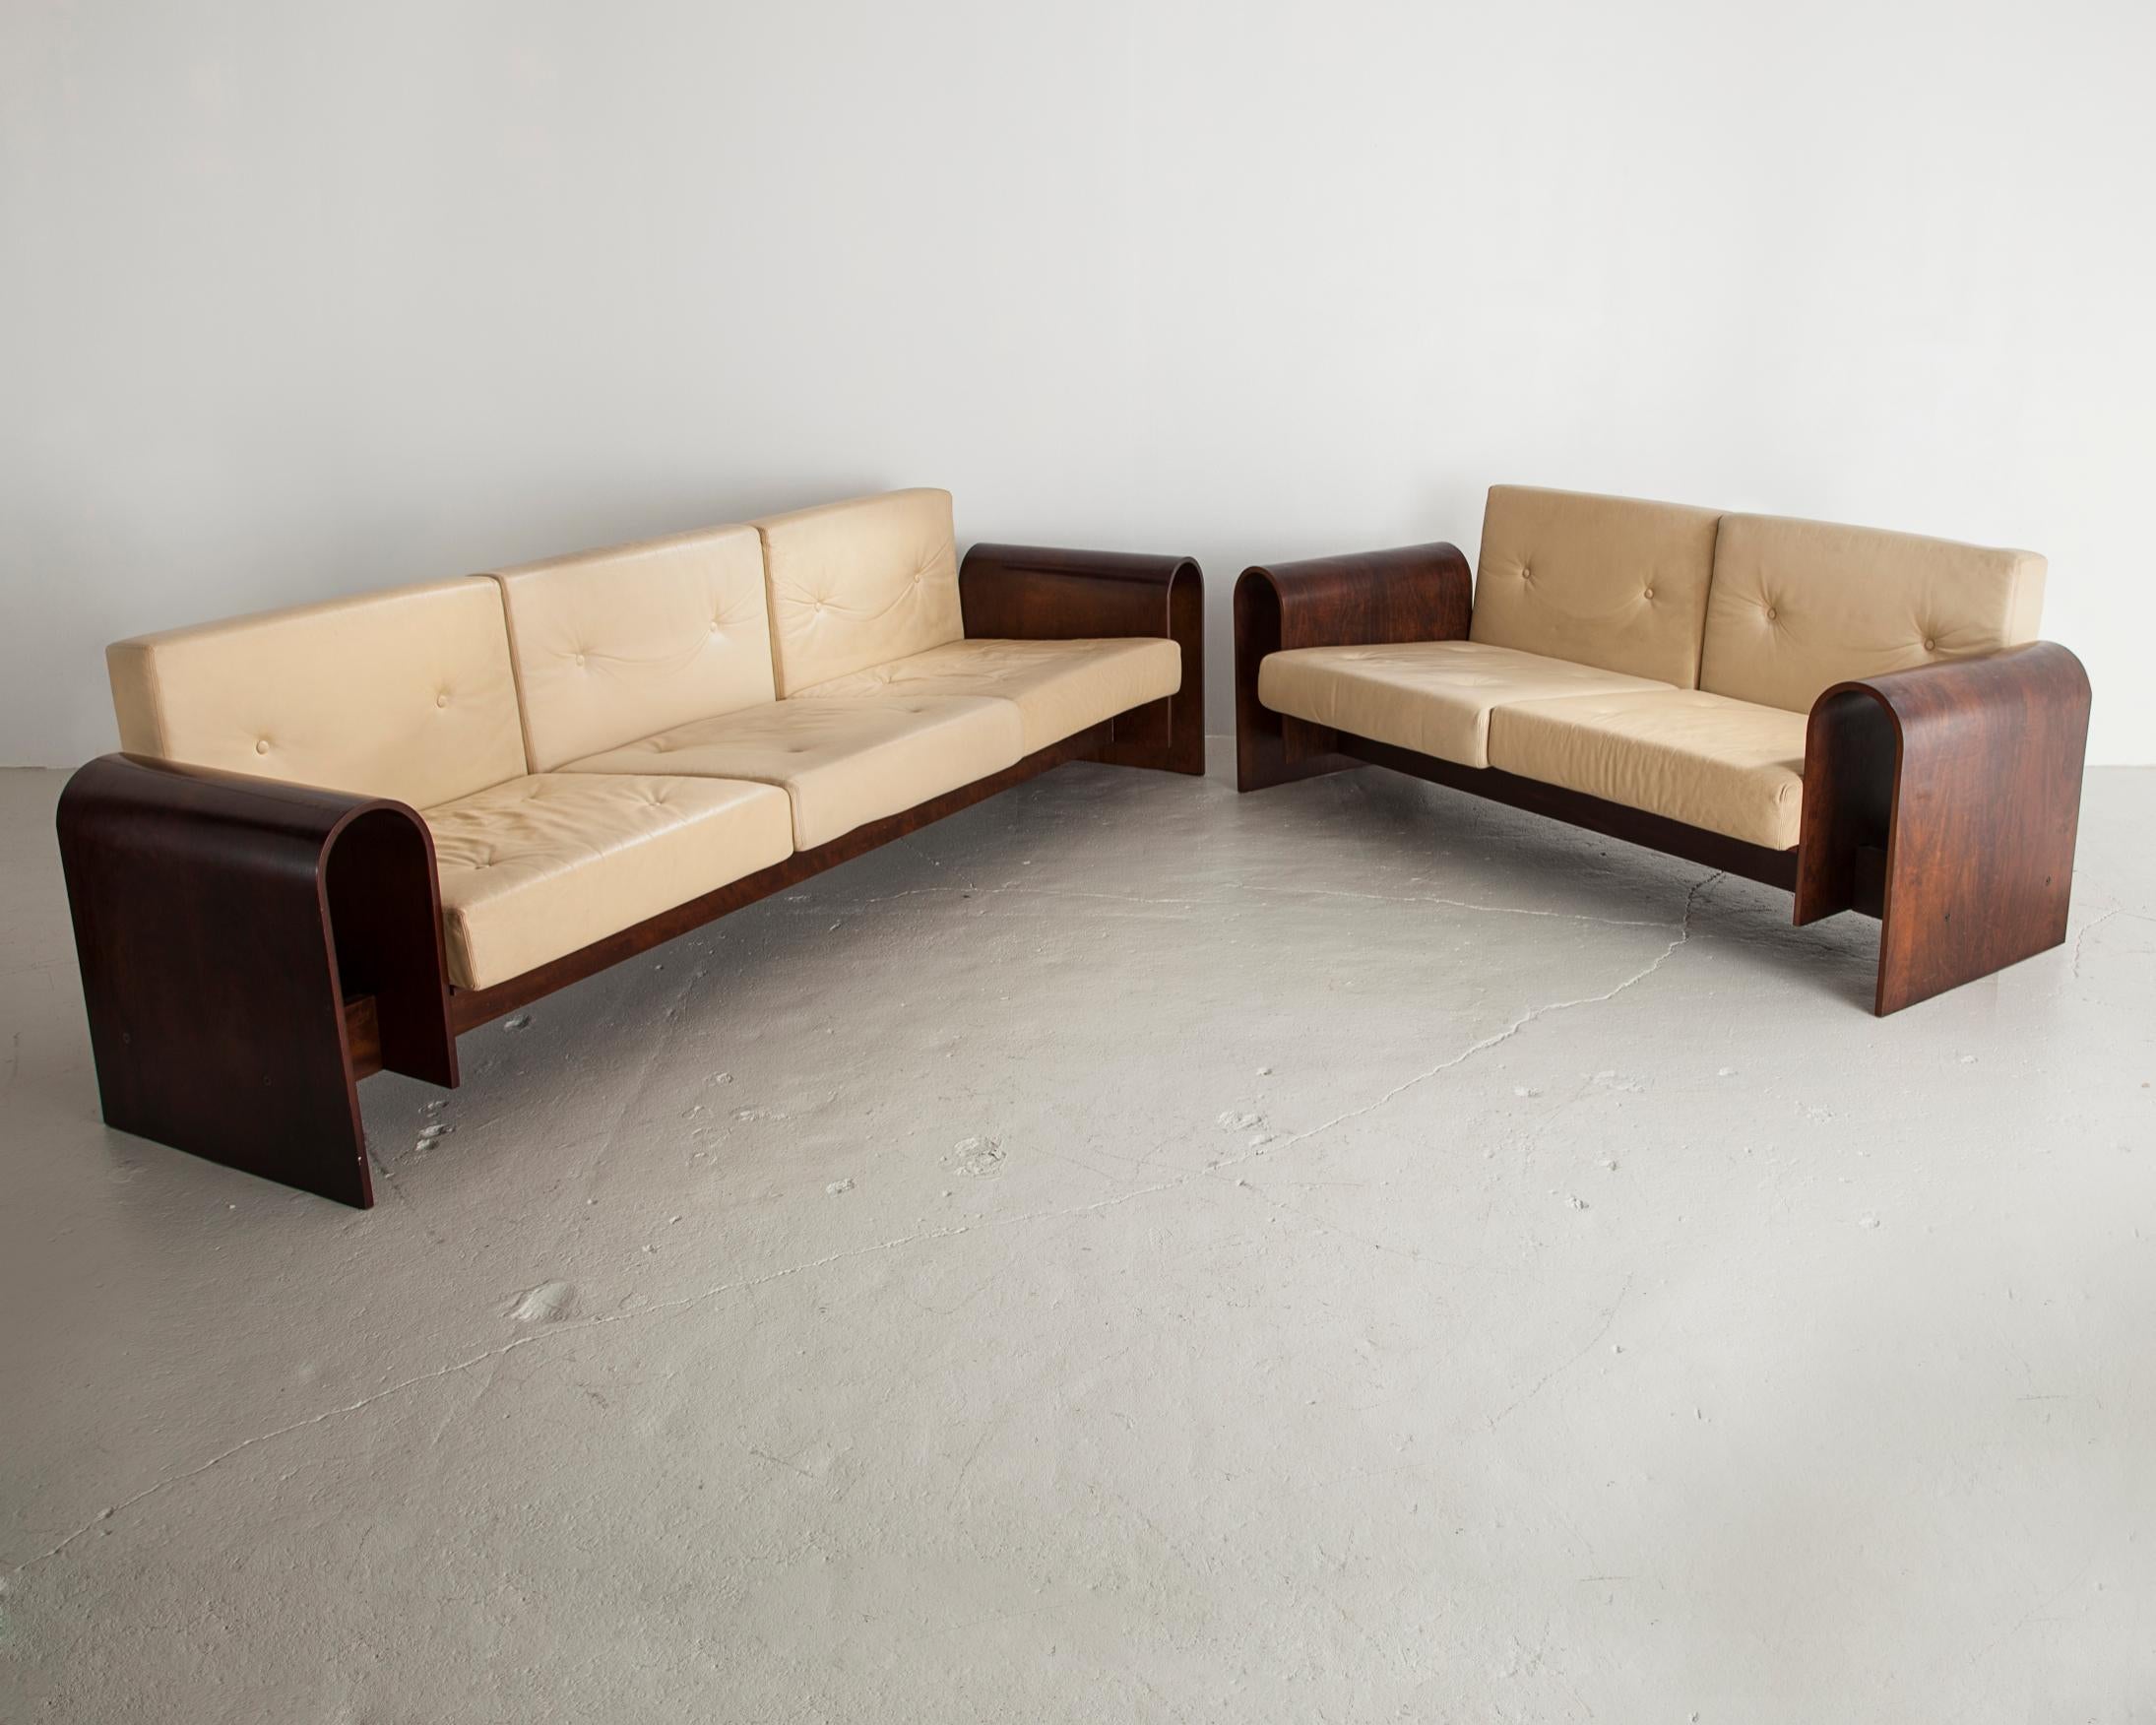 Two-Seat Sofa by Oscar Niemeyer In Good Condition For Sale In New York, NY